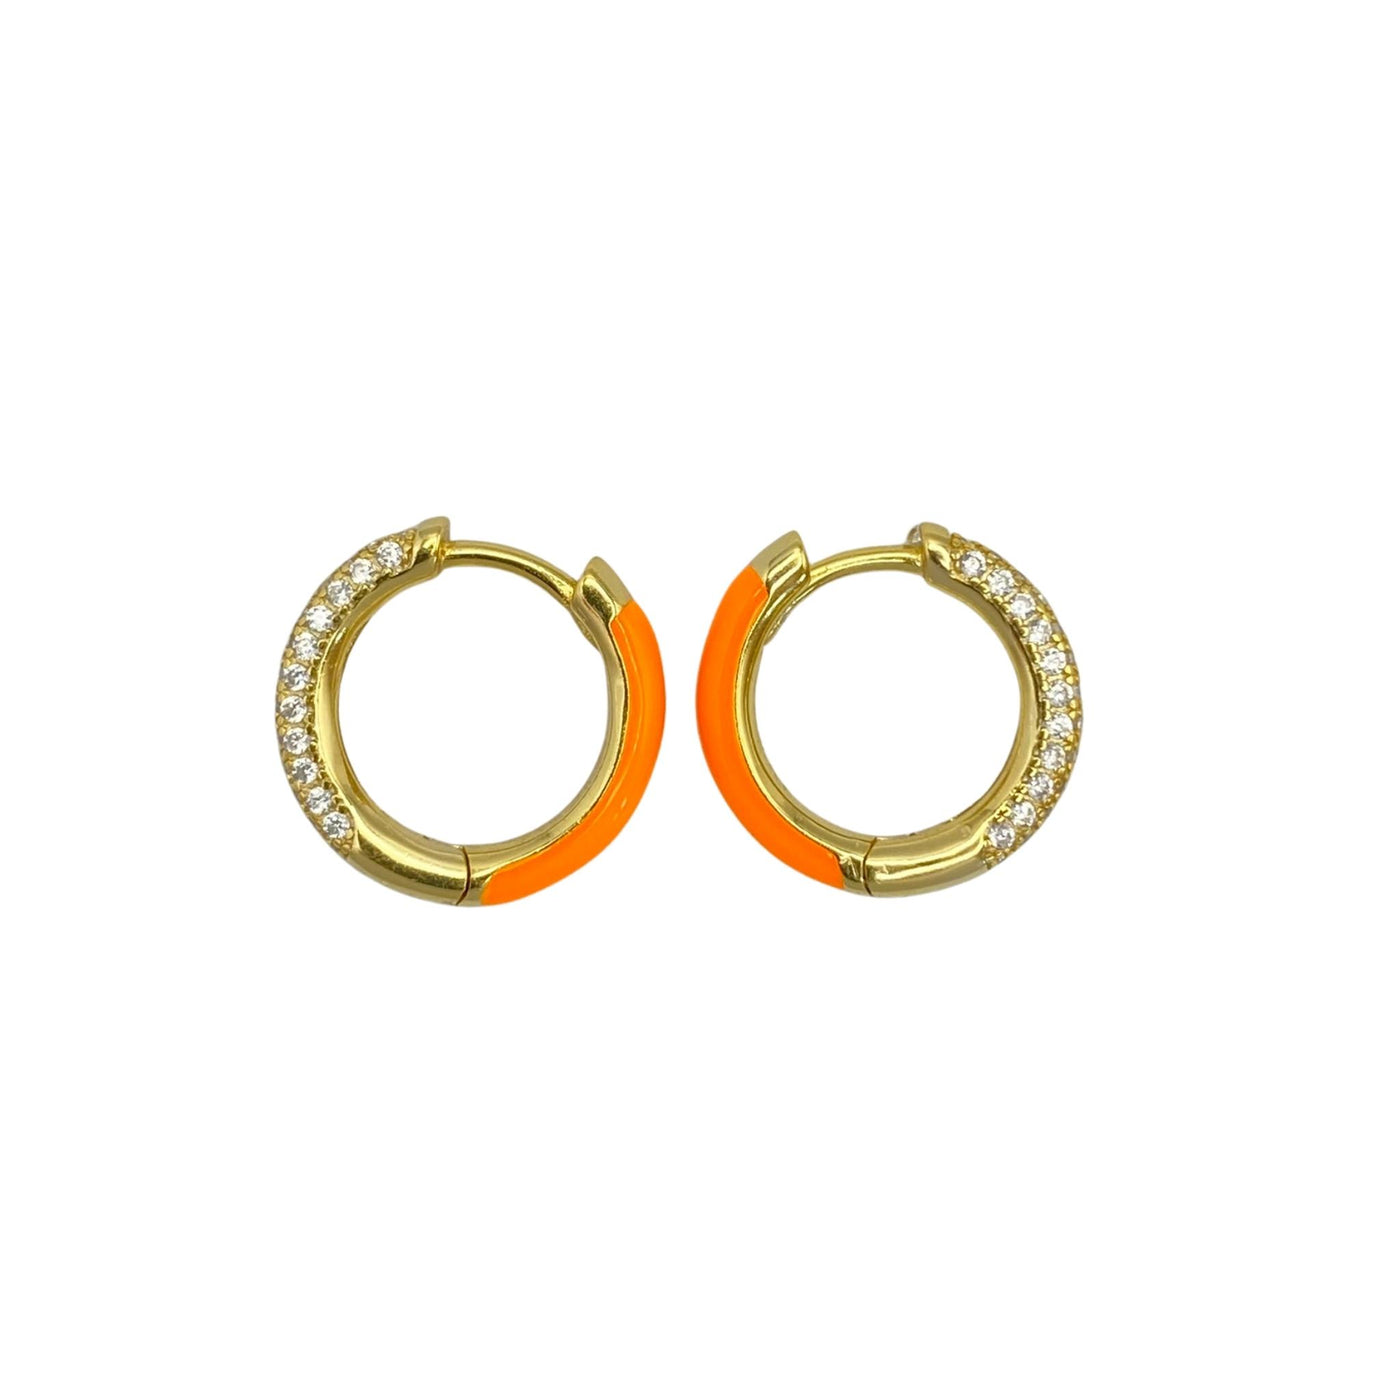 Silver earrings with enamel and zirconia - yellow 15 mm